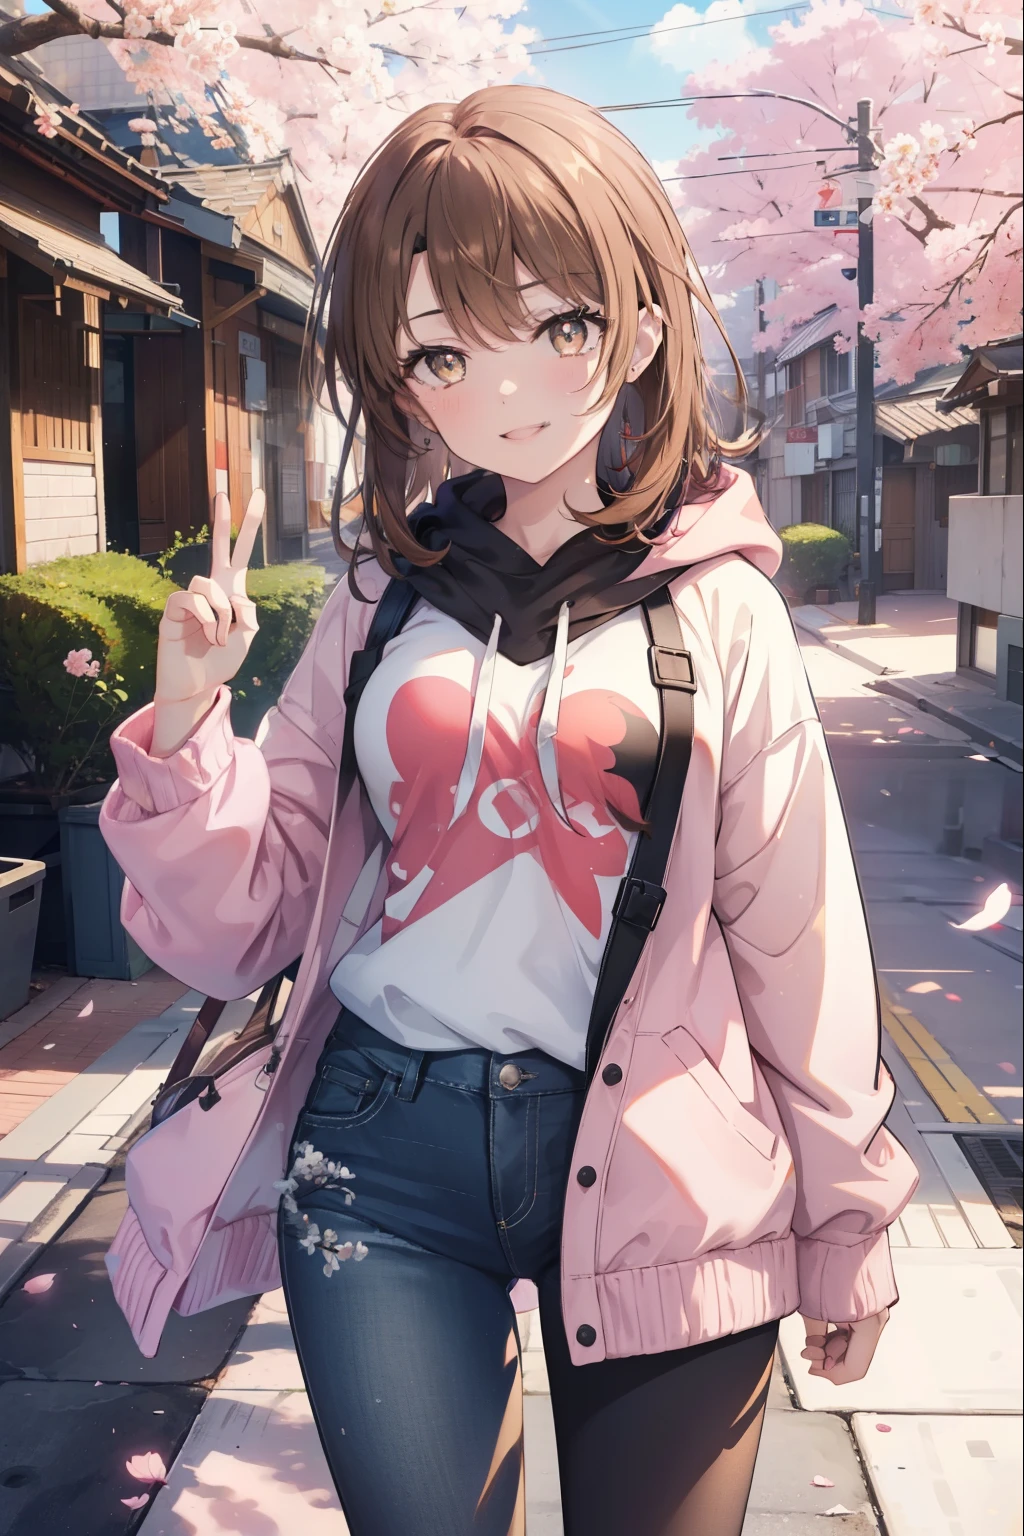 irohaisshiki, iroha isshiki, long hair, brown hair, (brown eyes:1.5), happy smile, smile, open your mouth,Put your hand over your mouth and make a peace sign, 1 girl,towards the camera,pink hoodie,short denim pants,black tights,short boots,independent&#39;with your back to the wall、The cherry blossoms have bloomed,Cherry blossoms are scattered,
break indoors, Cherry blossom tree-lined path,
break looking at viewer,Upper body,
break (masterpiece:1.2), highest quality, High resolution, unity 8k wallpaper, (shape:0.8), (fine and beautiful eyes:1.6), highly detailed face, perfect lighting, Very detailed CG, (perfect hands, perfect anatomy),